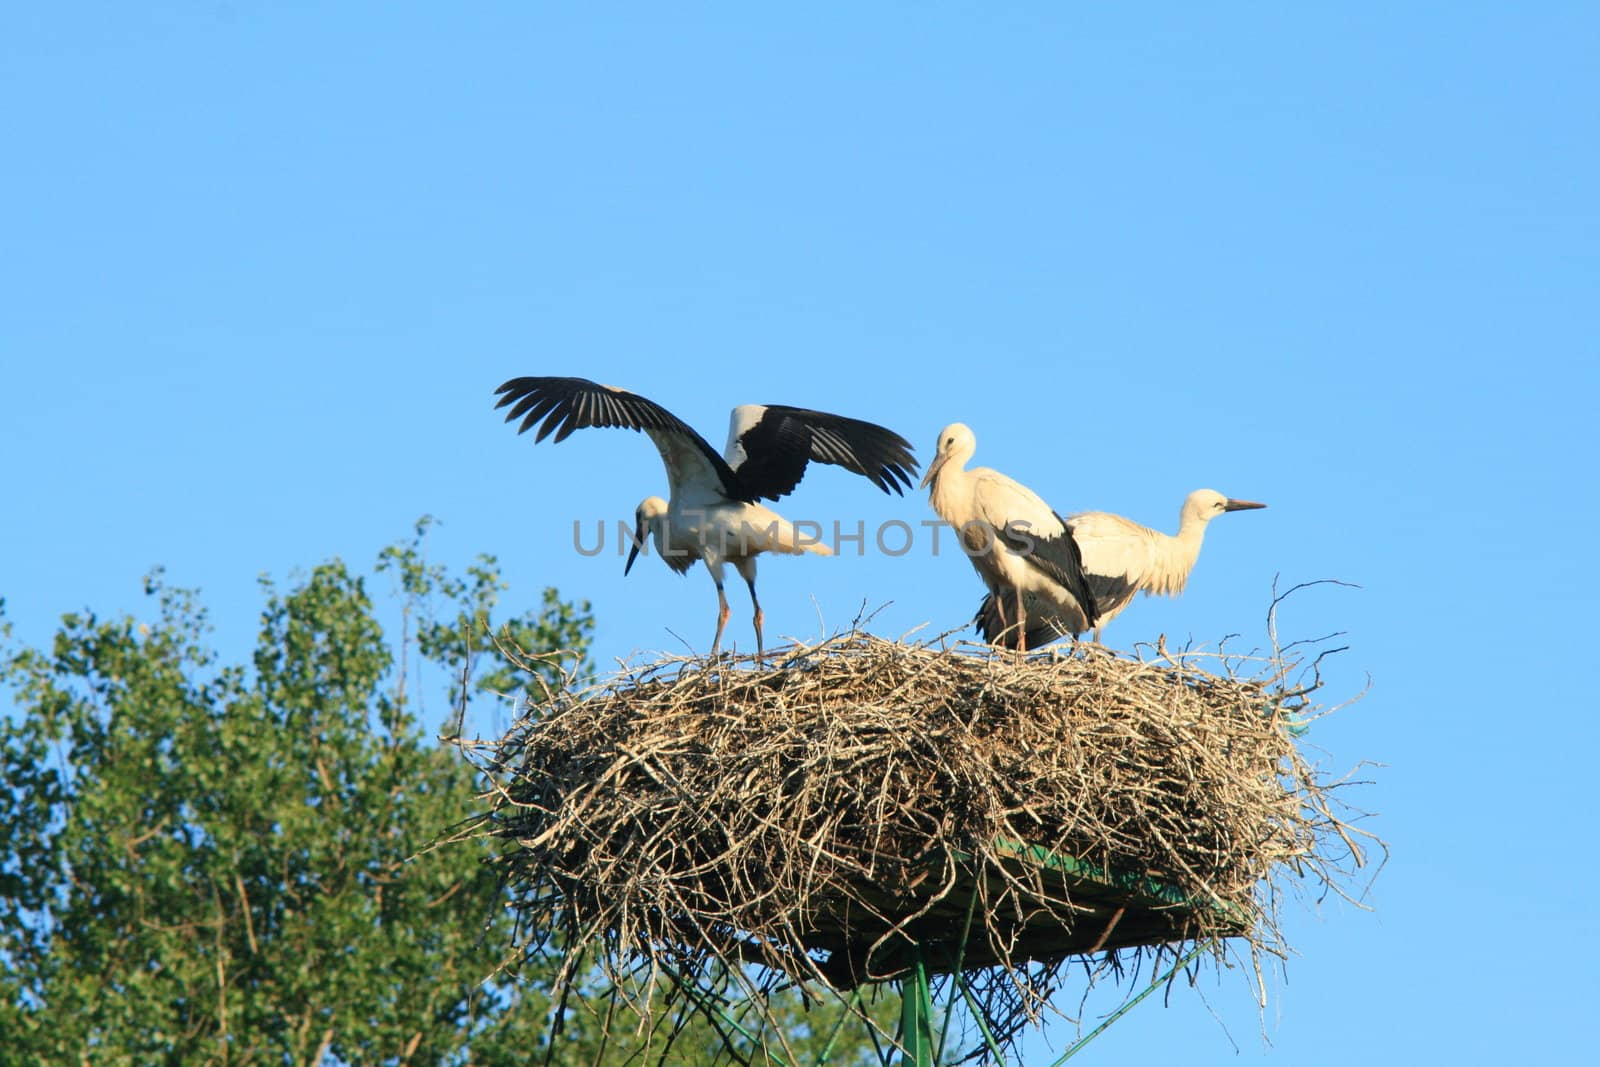 A stork flying away from the nest